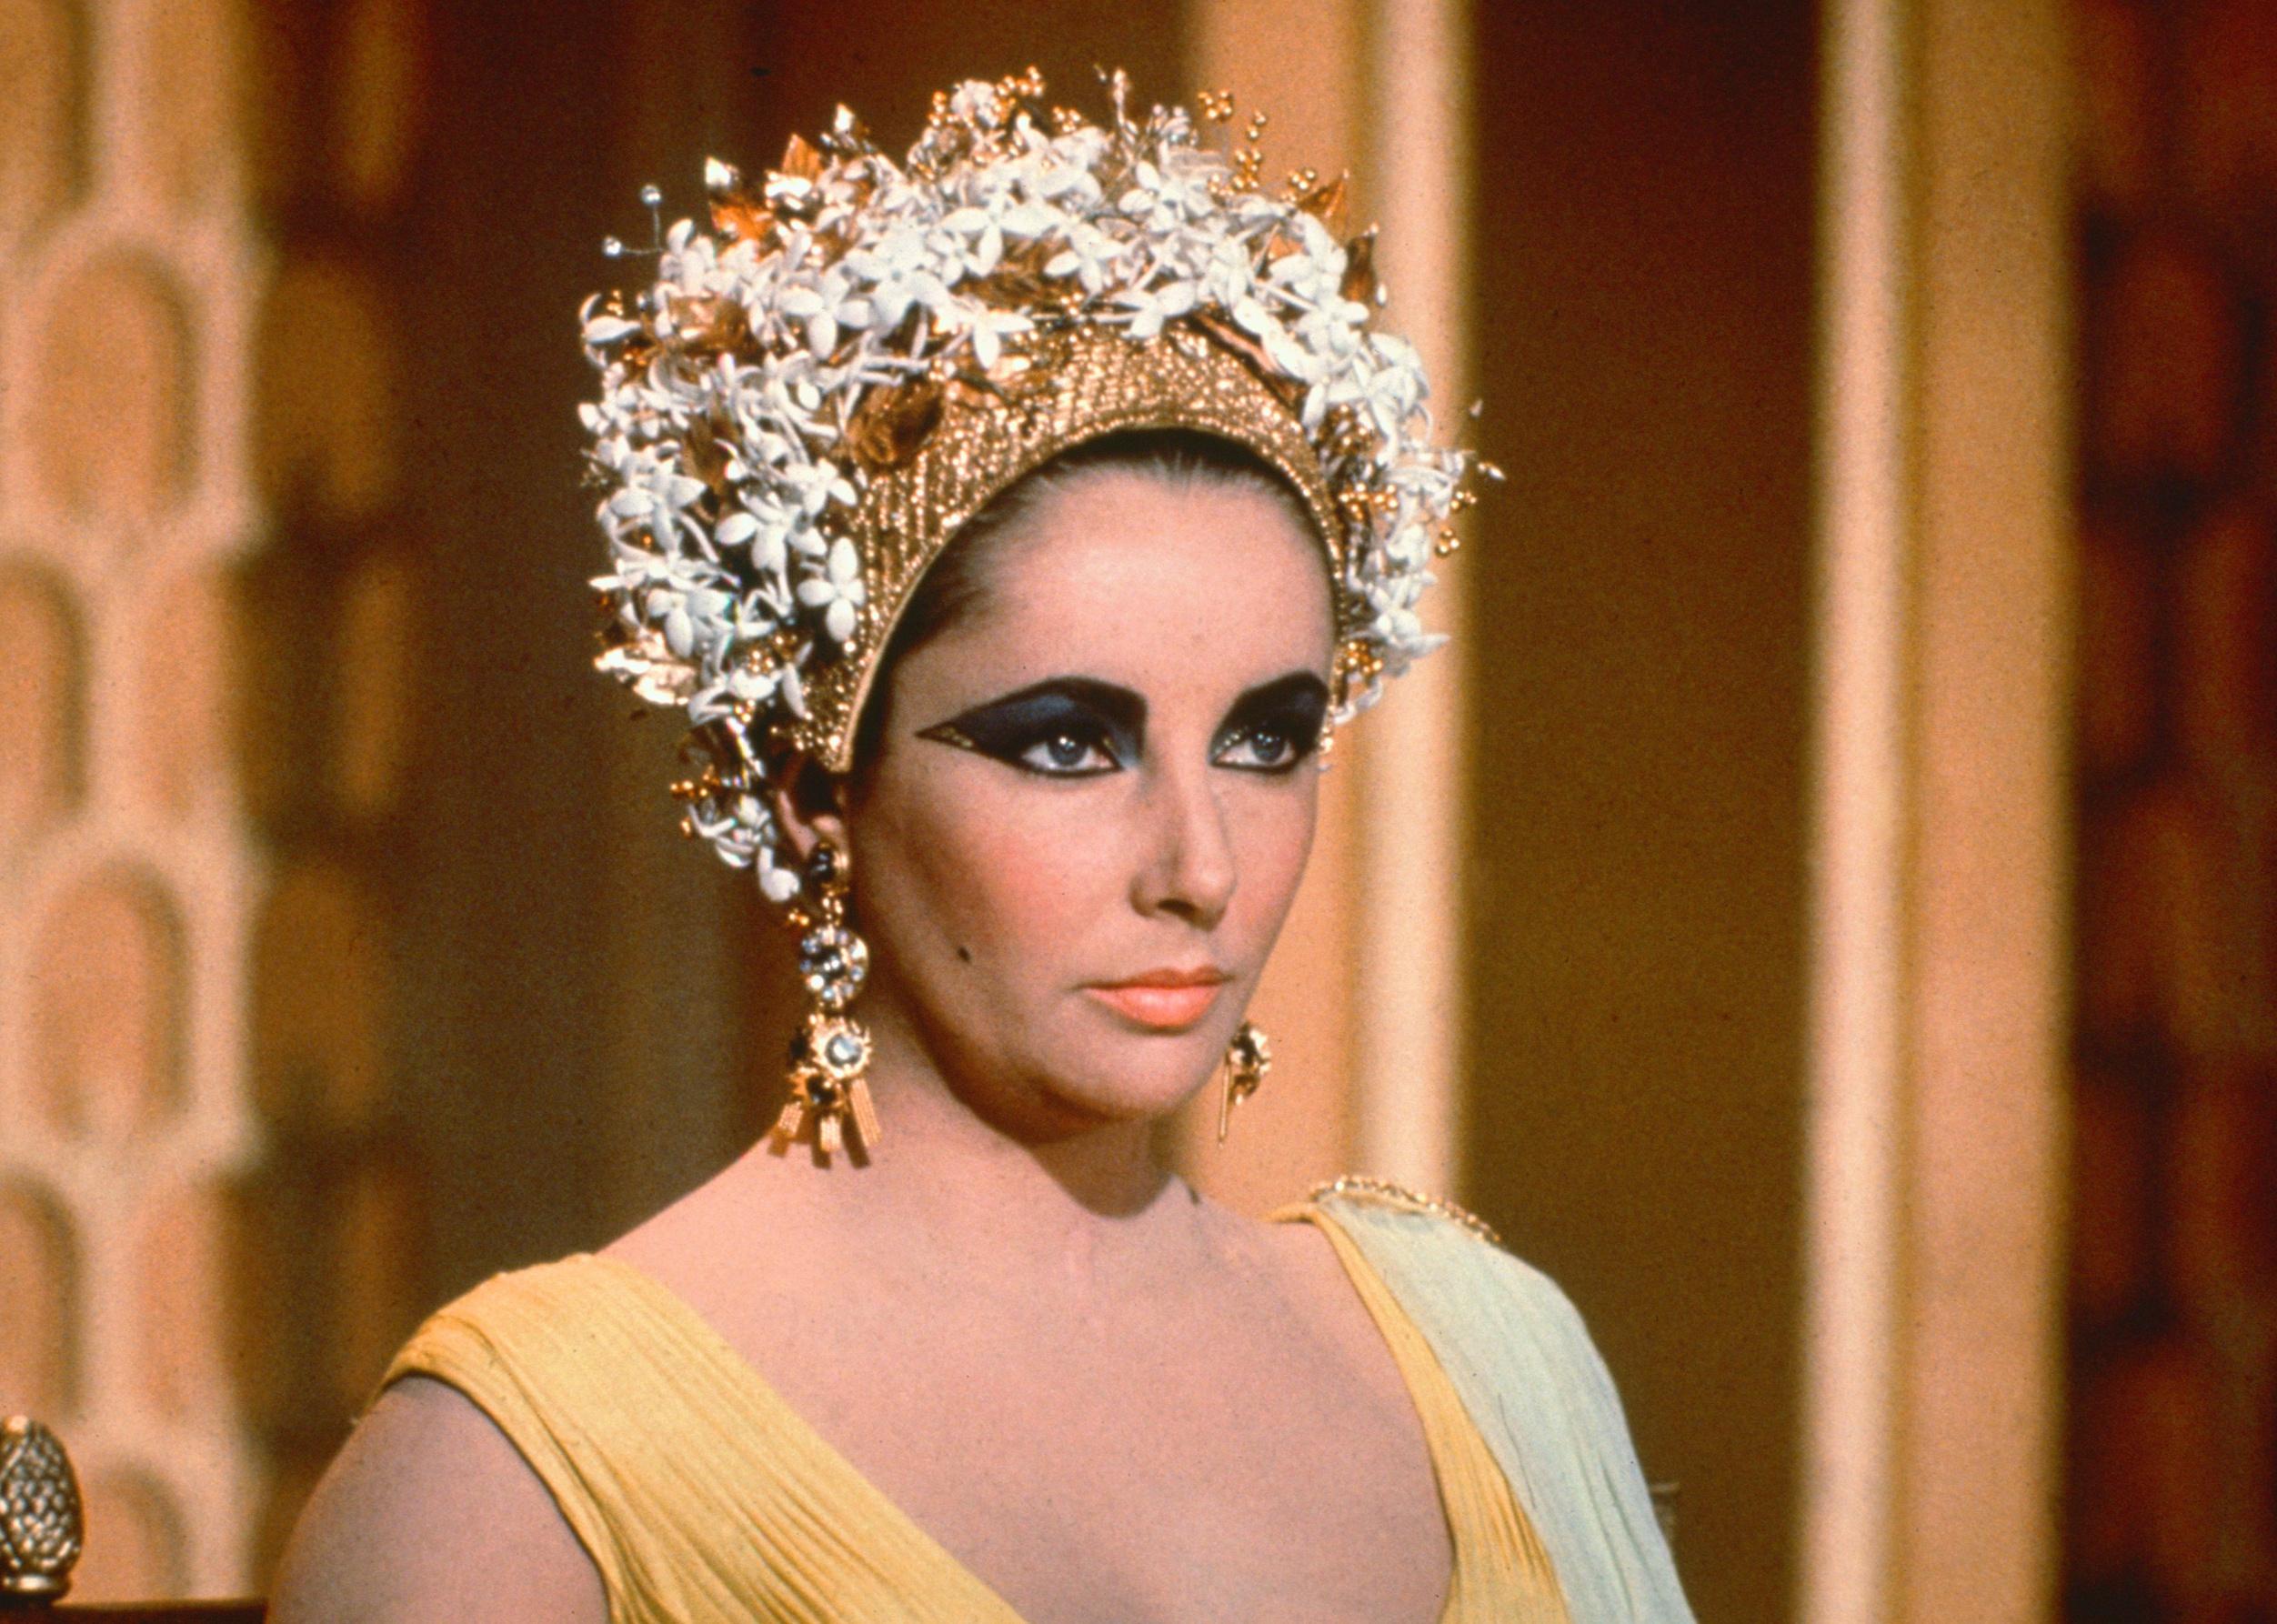 Elizabeth Taylor in costume with gold jewellery in a publicity still for the film, Cleopatra, 1963.